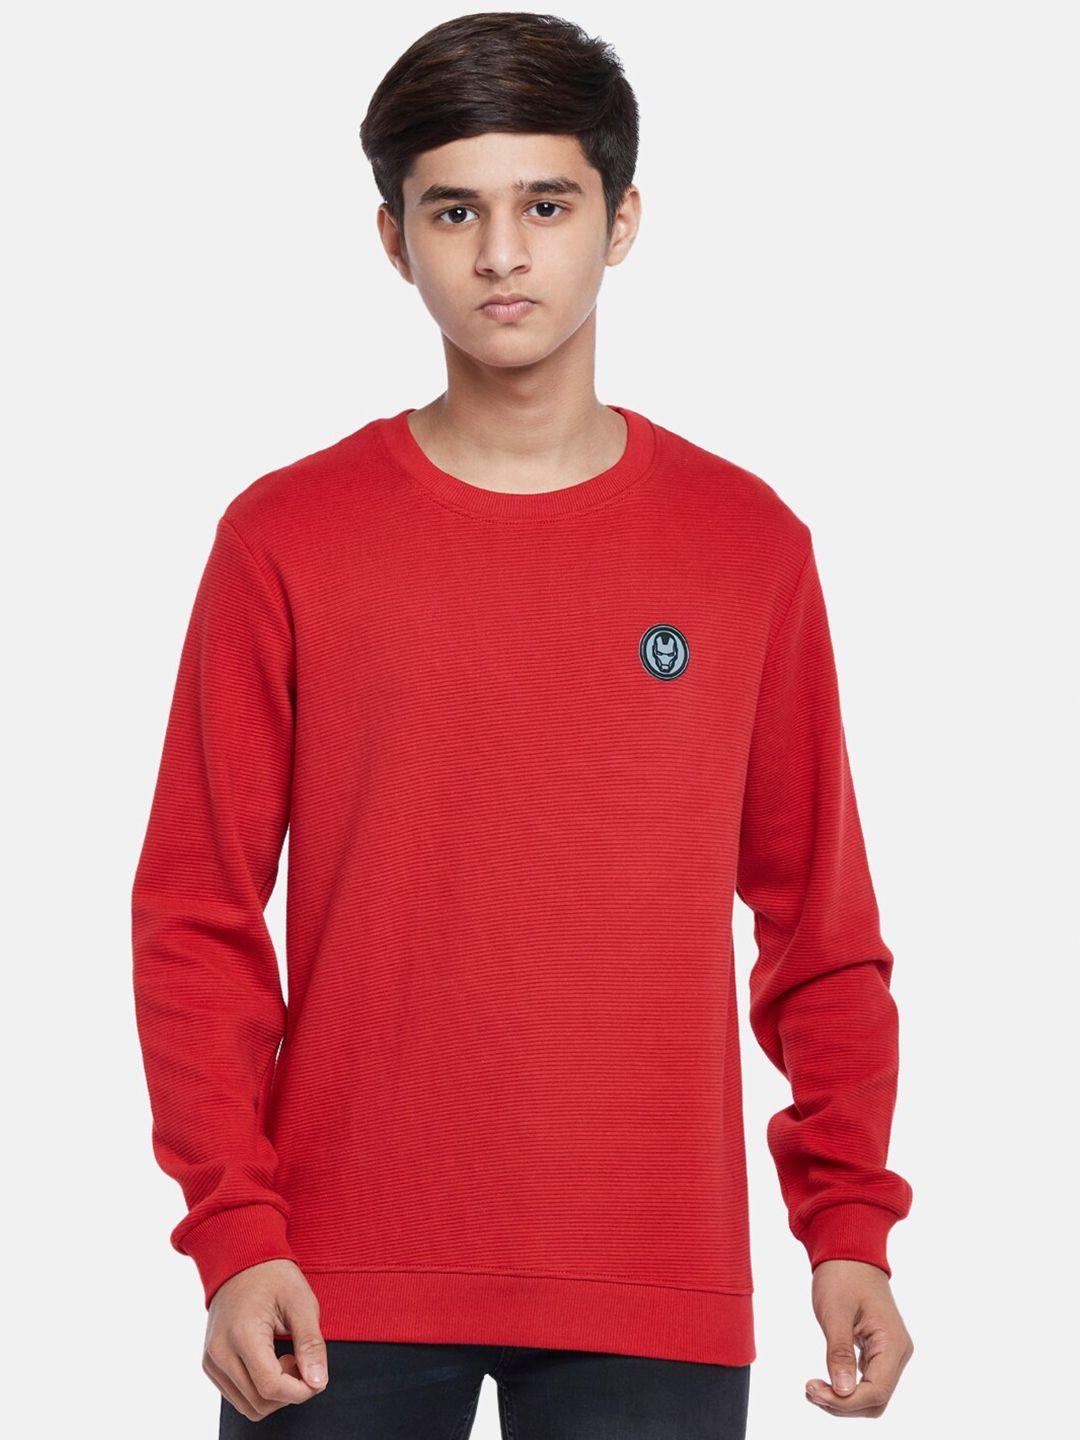 coolsters by pantaloons boys red solid cotton sweatshirt